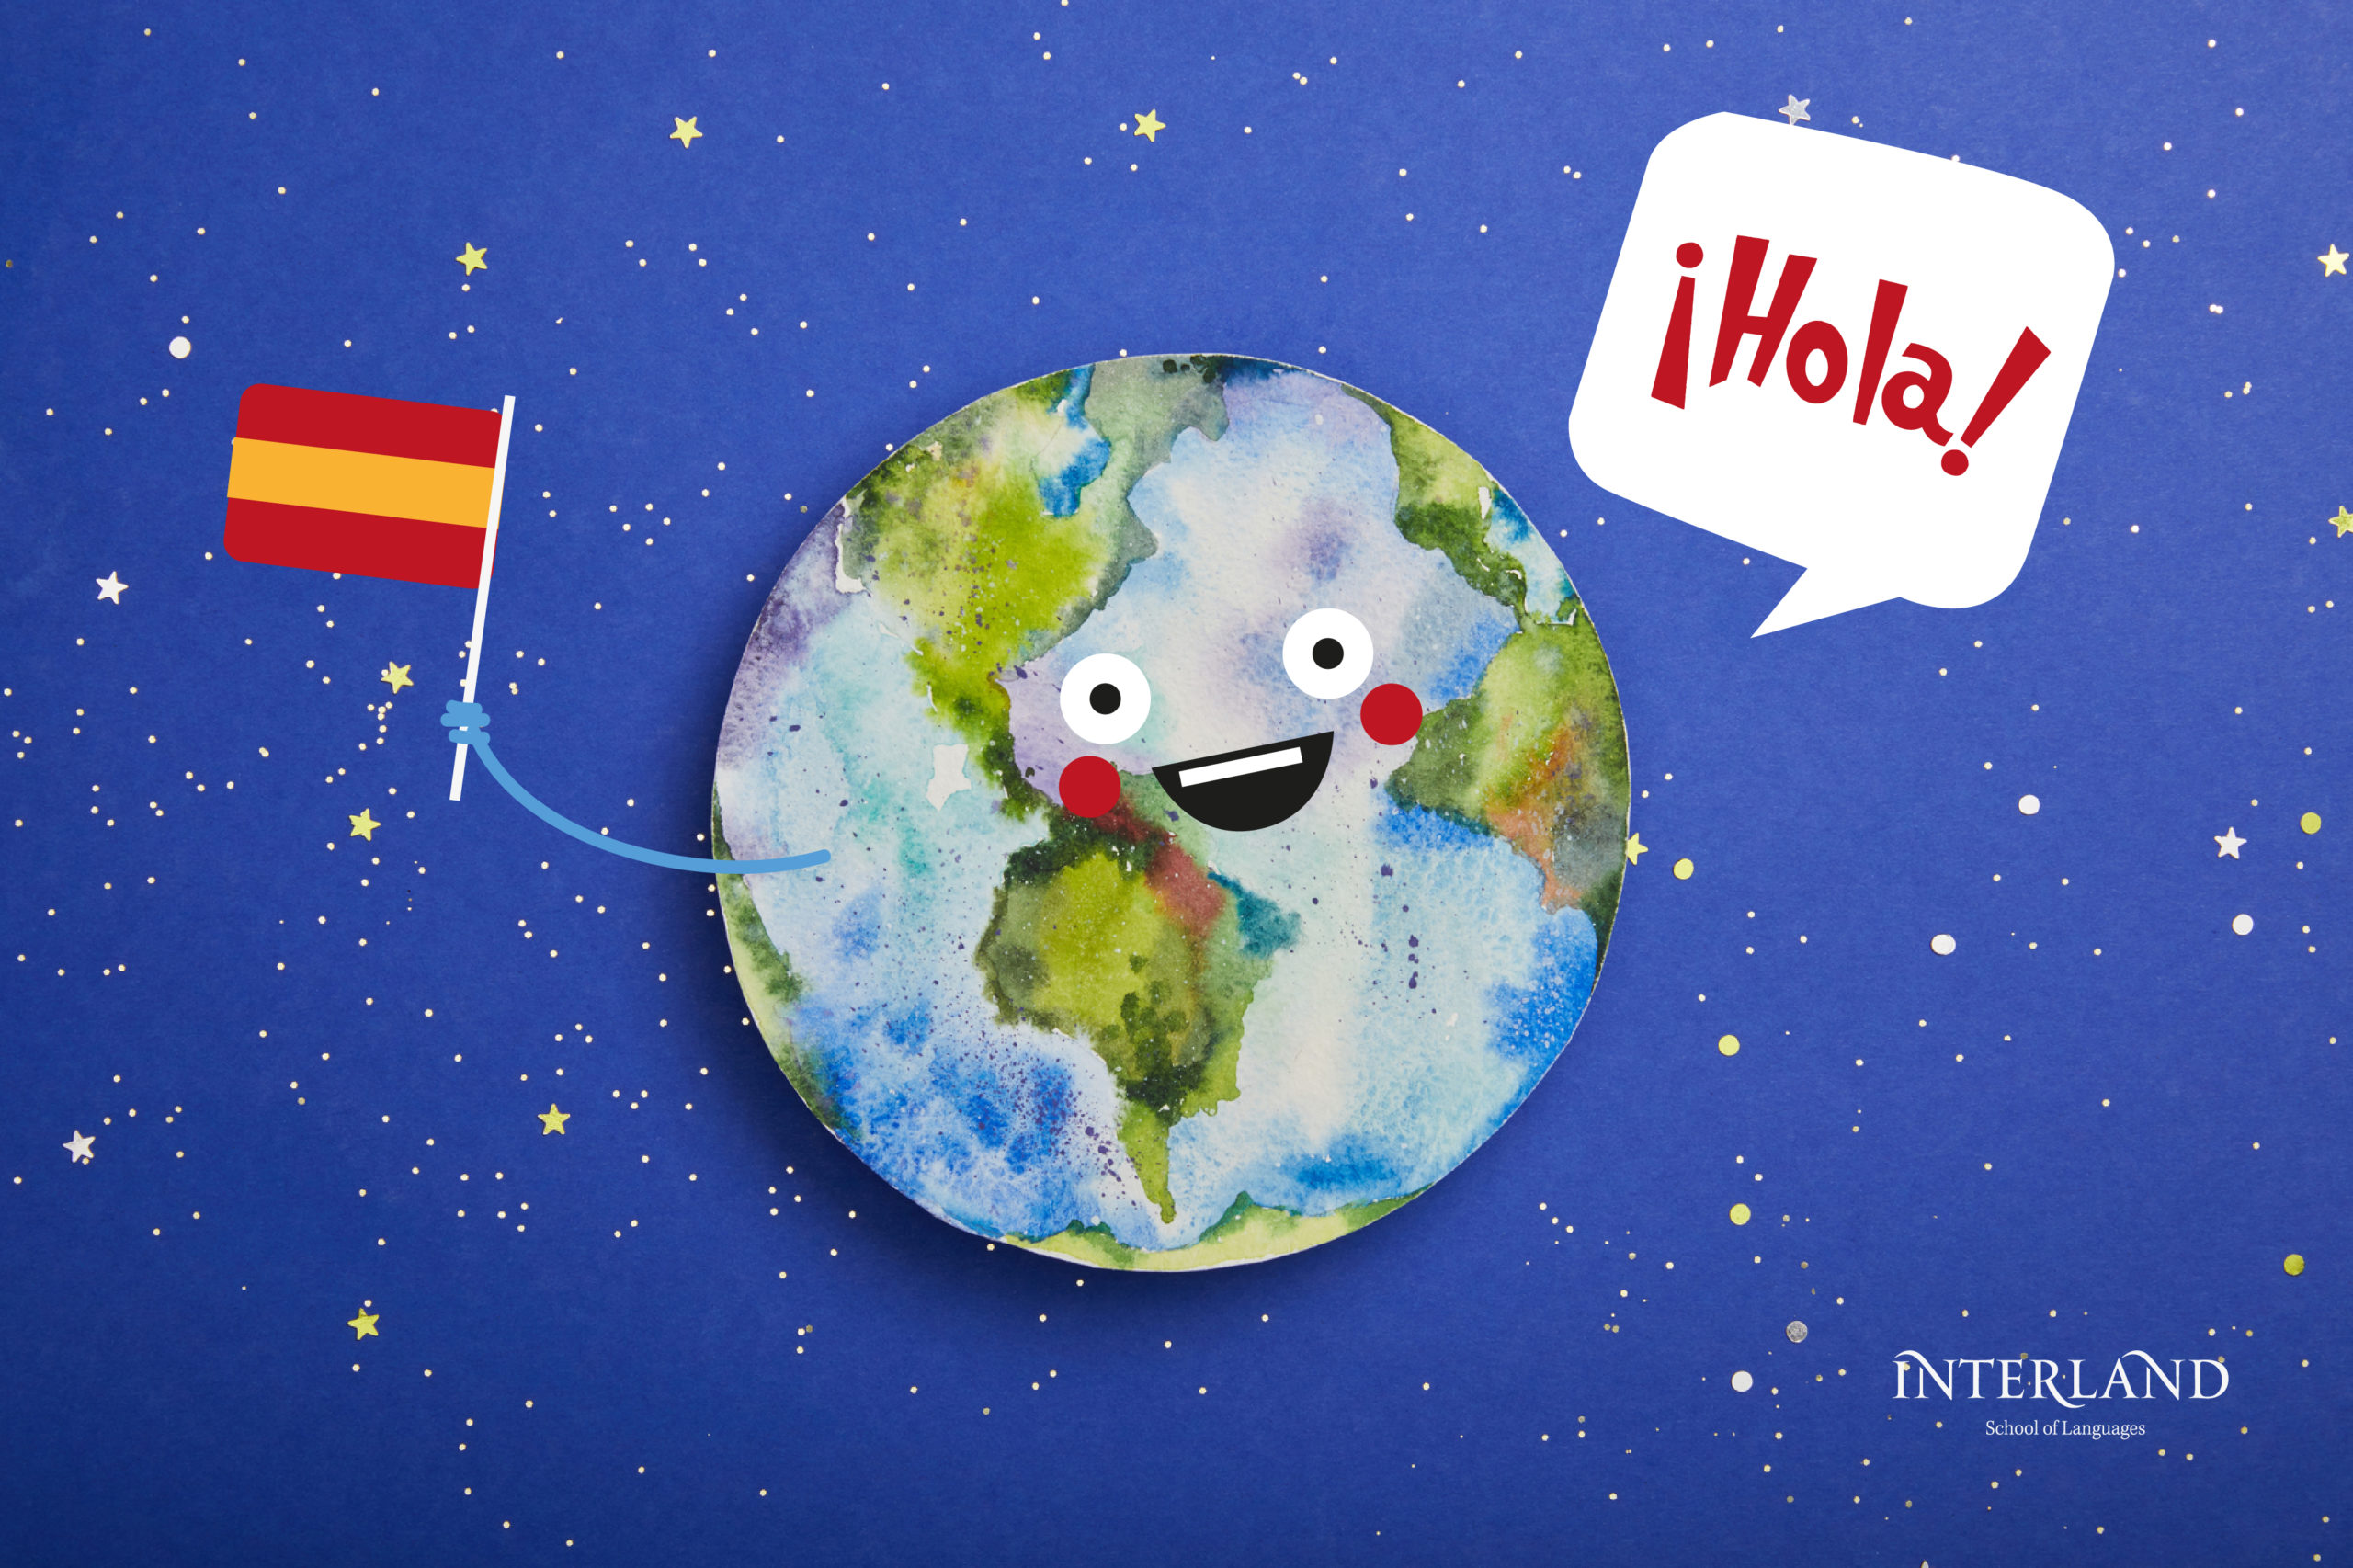 STUDY SPANISH, ONE OF THE MOST SPOKEN LANGUAGES IN THE WORLD